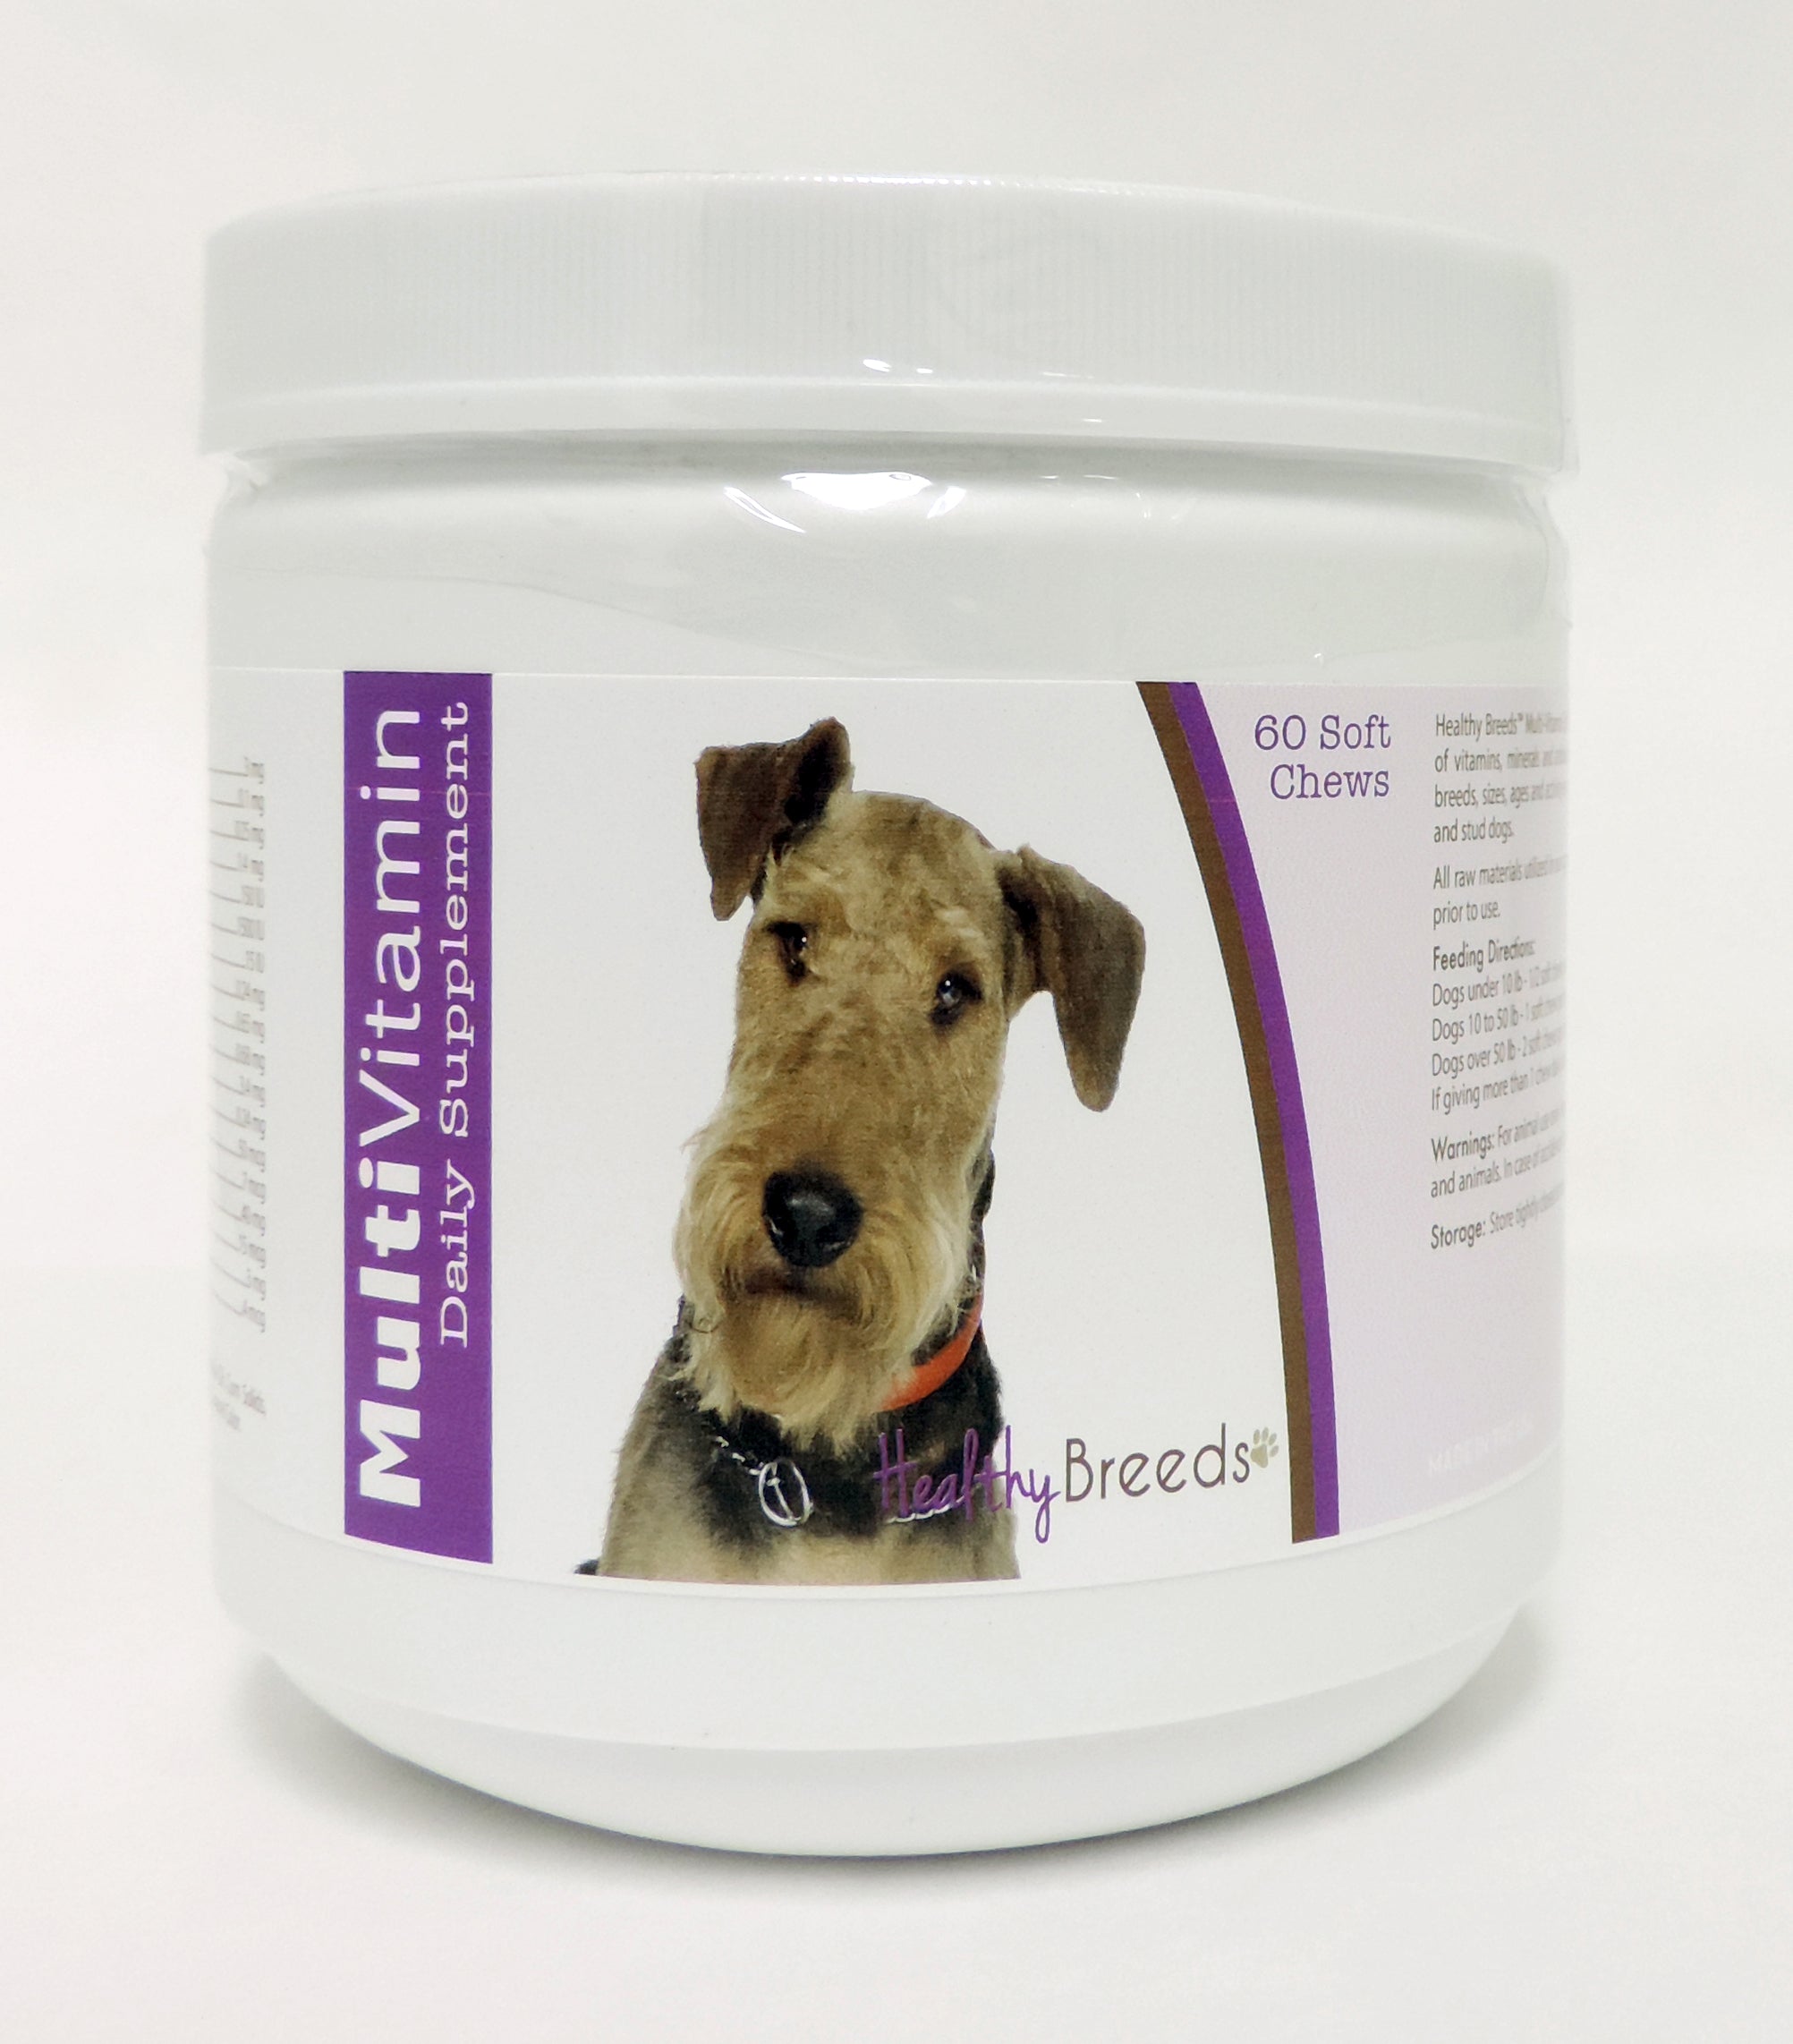 Airedale Terrier Multi-Vitamin Soft Chews 60 Count